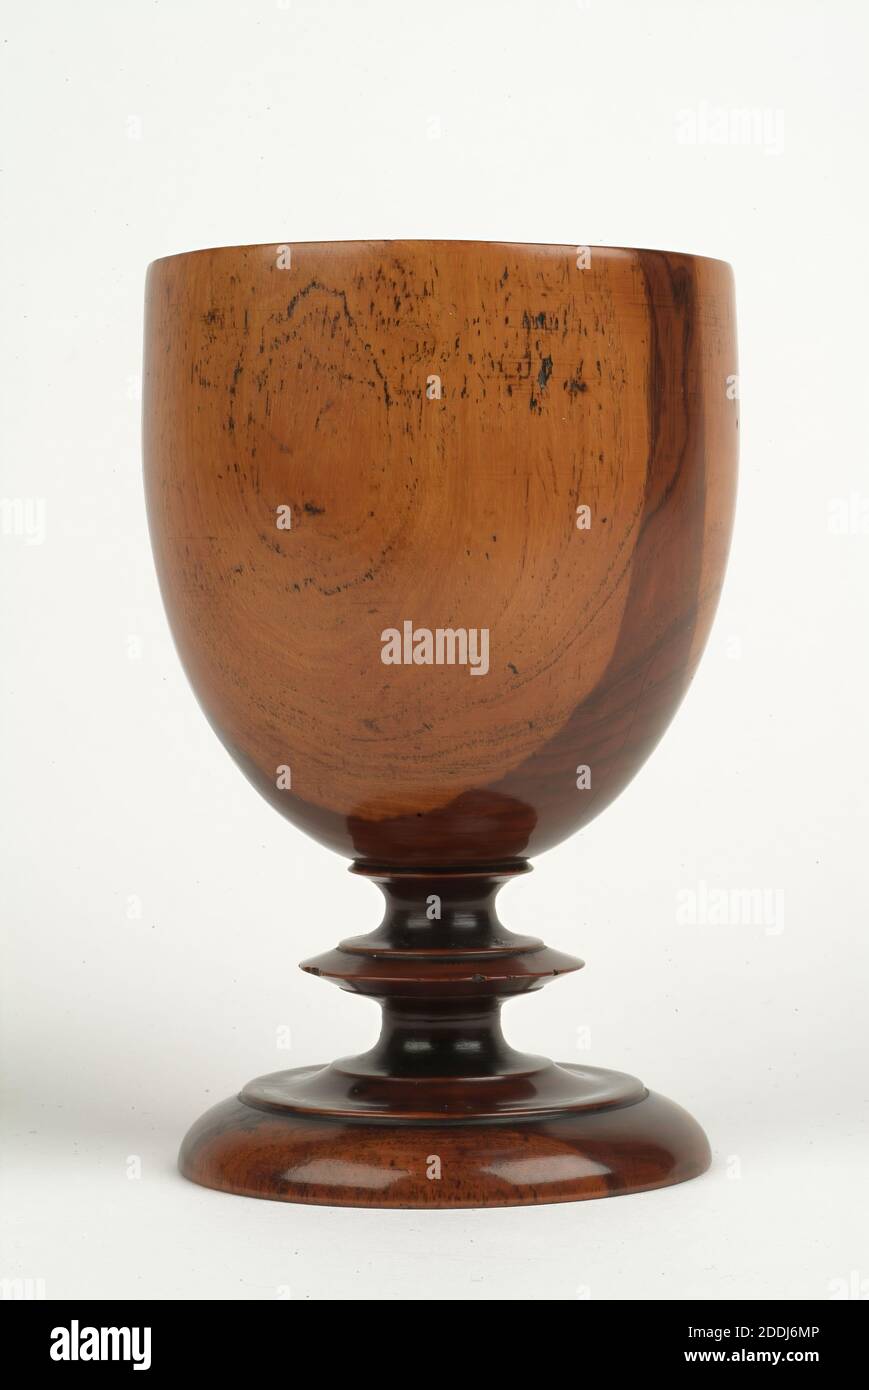 Cup, Goblet, 1700-1800, Made in England. This laburnum wood goblet is one of a pair, probably dating from the eighteenth century. We can tell that it was made on a pole lathe because the point where the goblet was held in place on the lathe leaves a characteristic mark on the base. It is very difficult to date these plain wooden goblets accurately as styles and patterns changed very slowly over the years. Laburnum wood was an interesting choice for this goblet as its warm tones and contrasting dark heart and yellow sapwood help to add a certain beauty and finesse Stock Photo